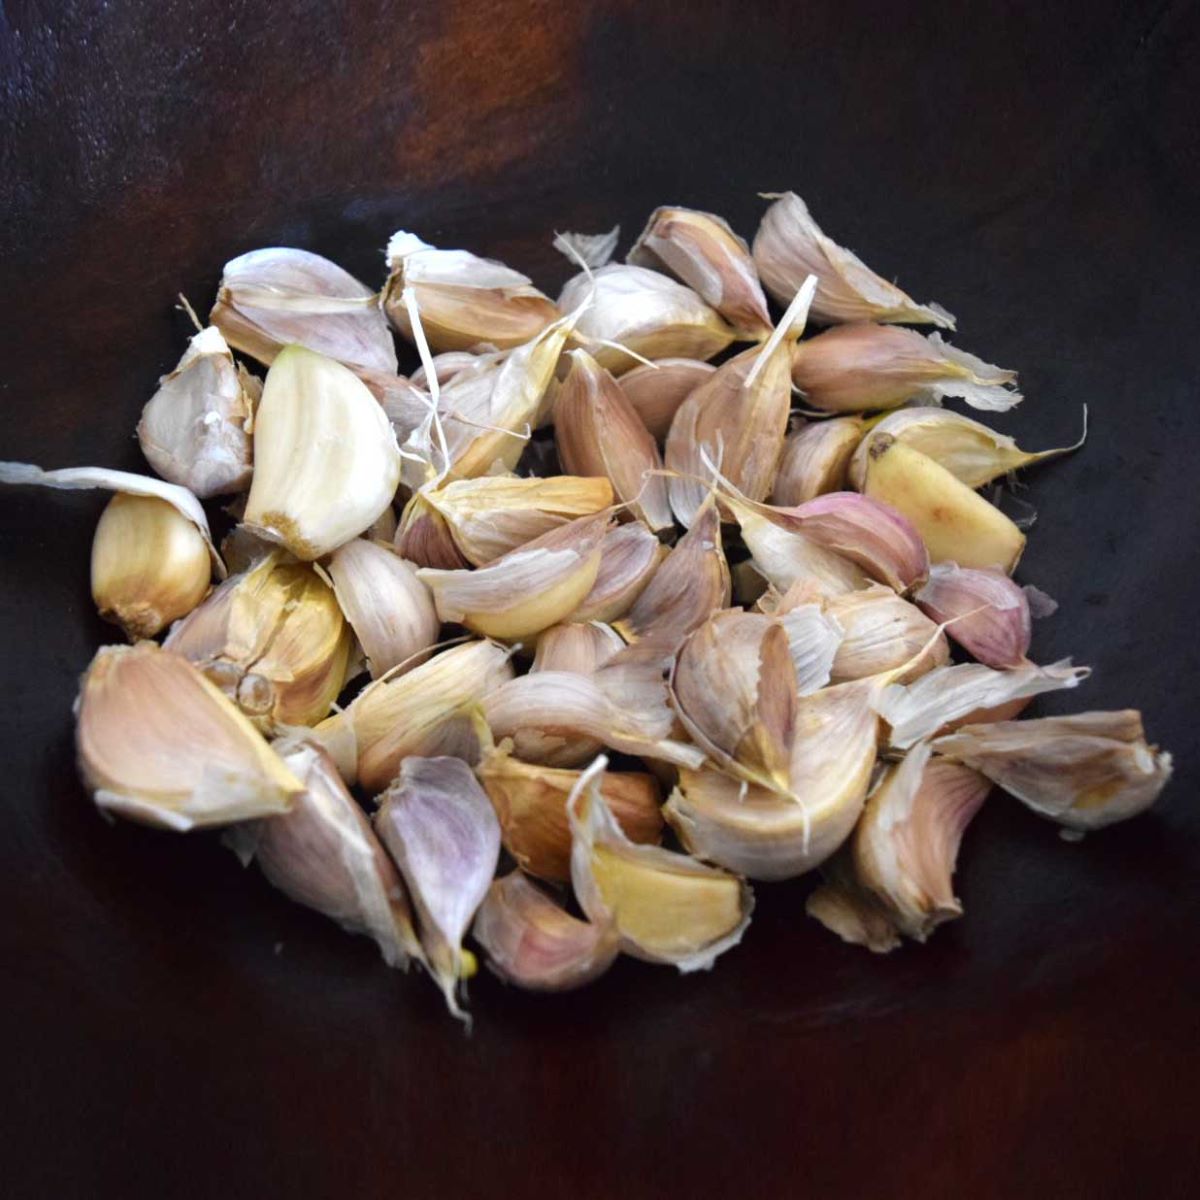 How To Store Garlic Seeds